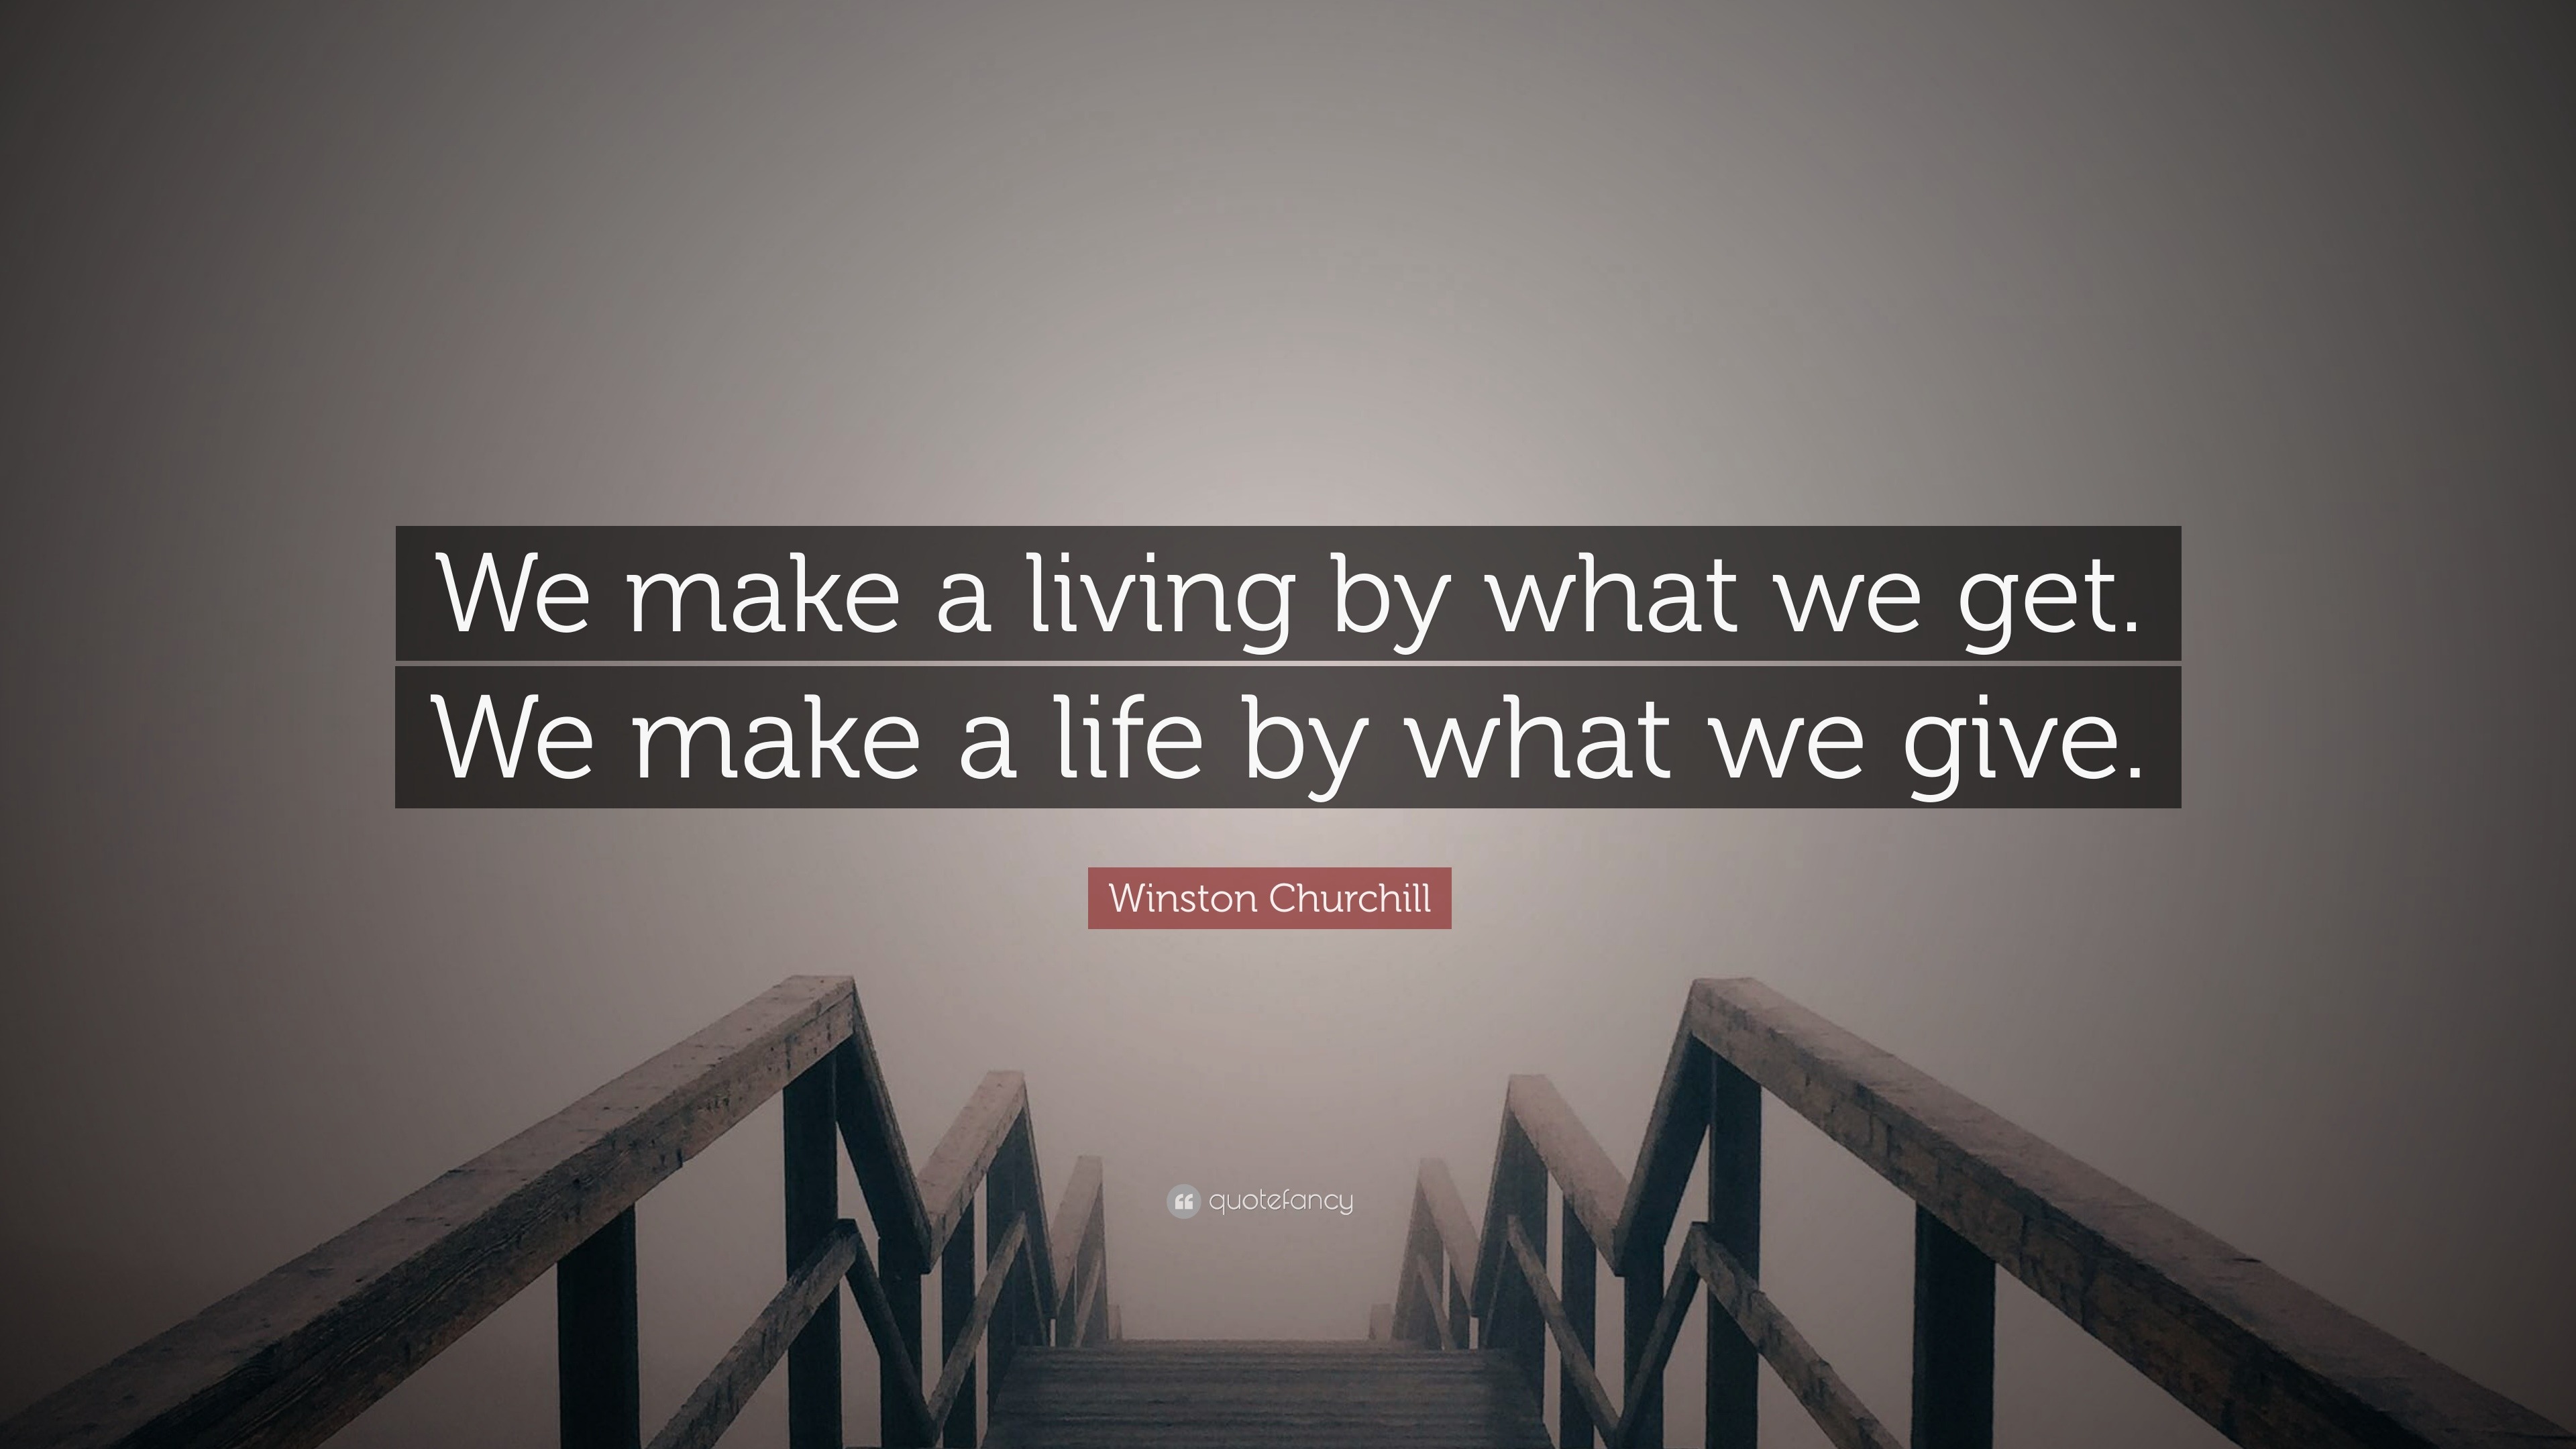 Winston Churchill Quote: "We make a living by what we get ...